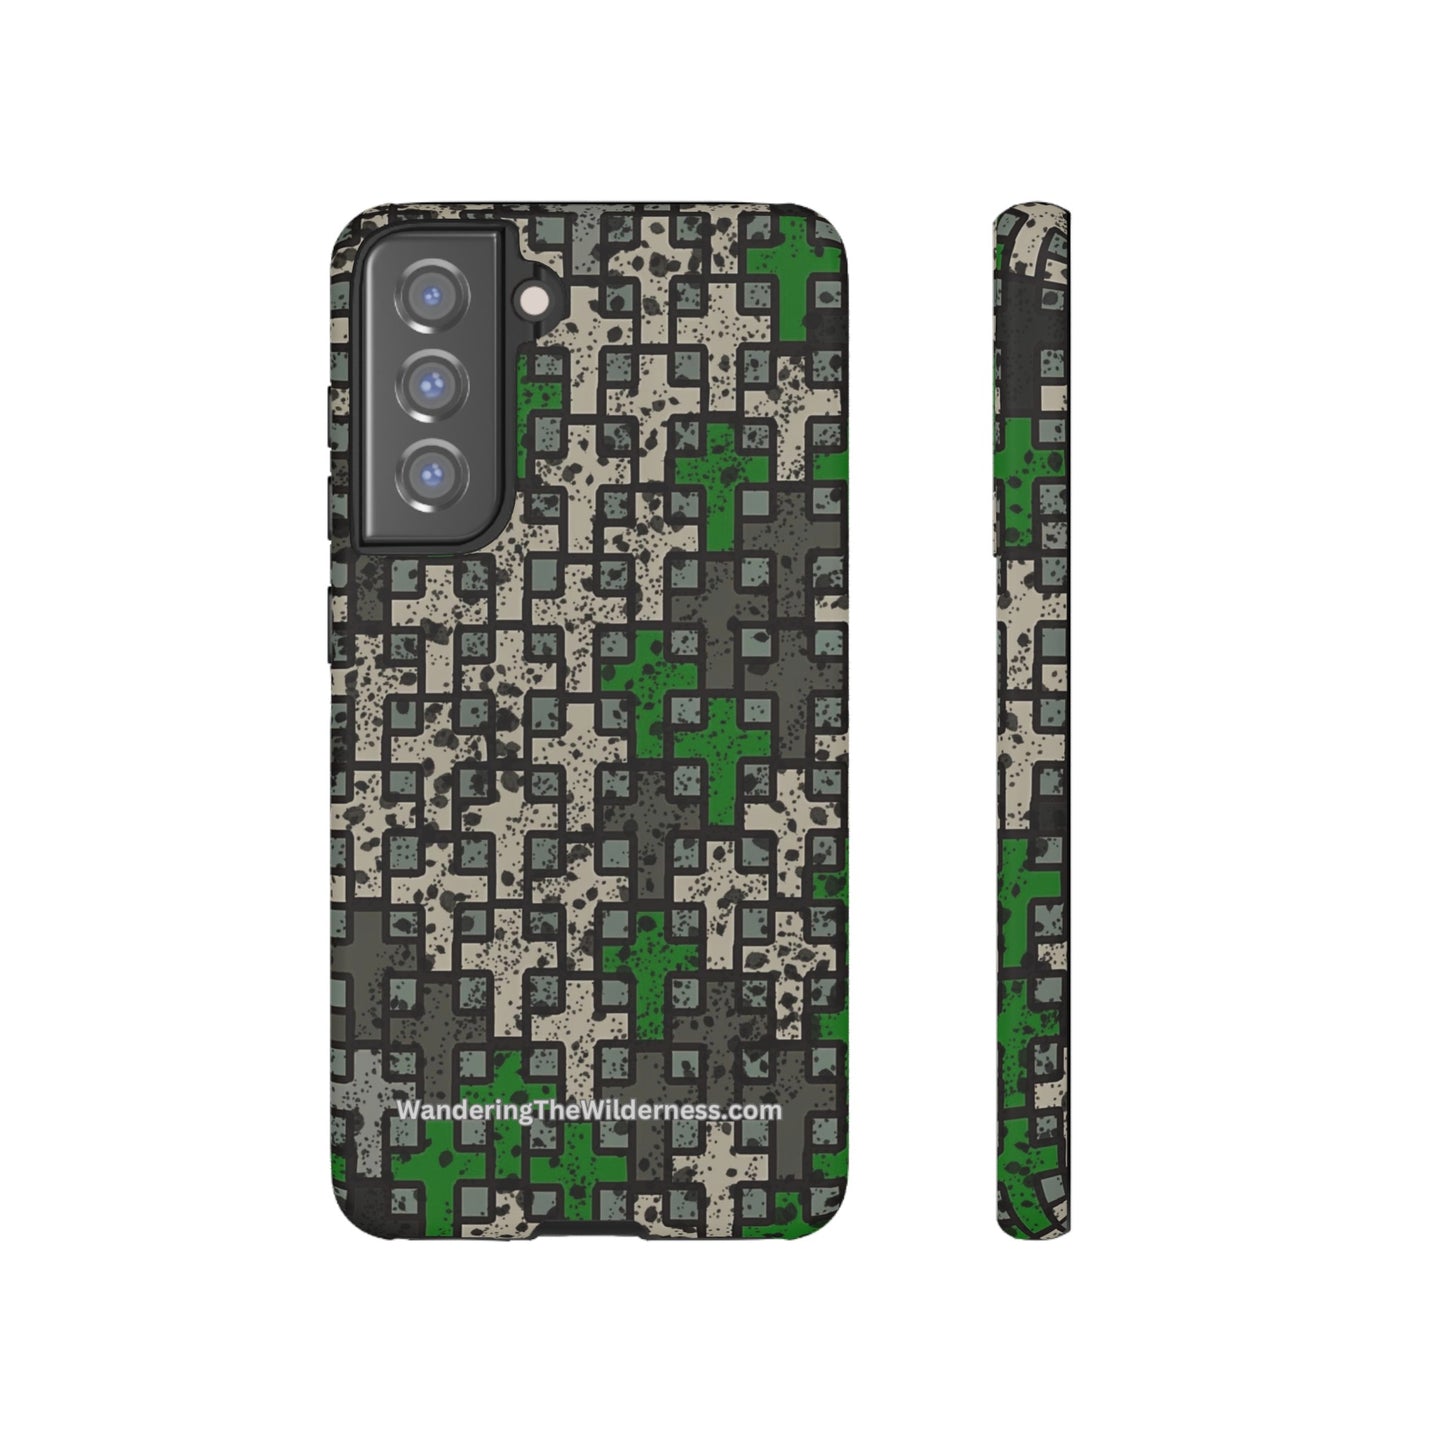 Wandering the Wilderness Hickory Flats camo Tough Cases